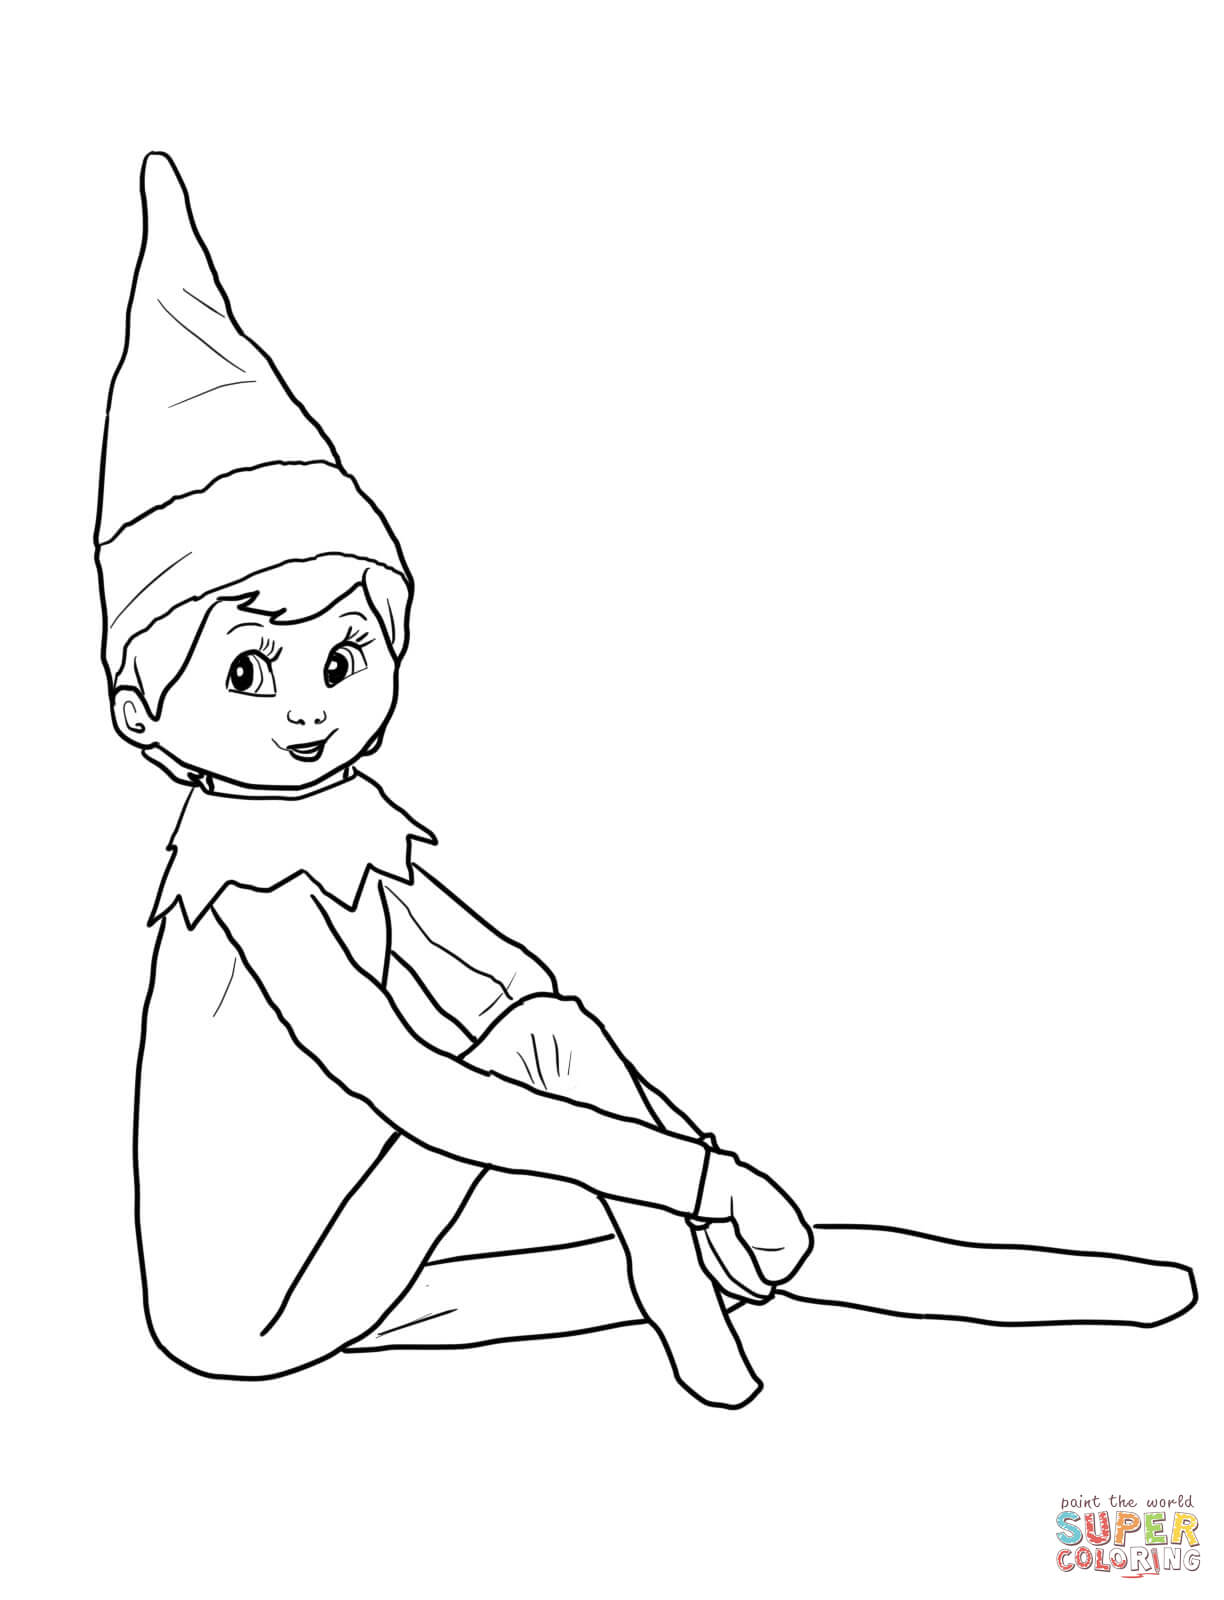 Elf black and white elf on the shelf coloring pages free